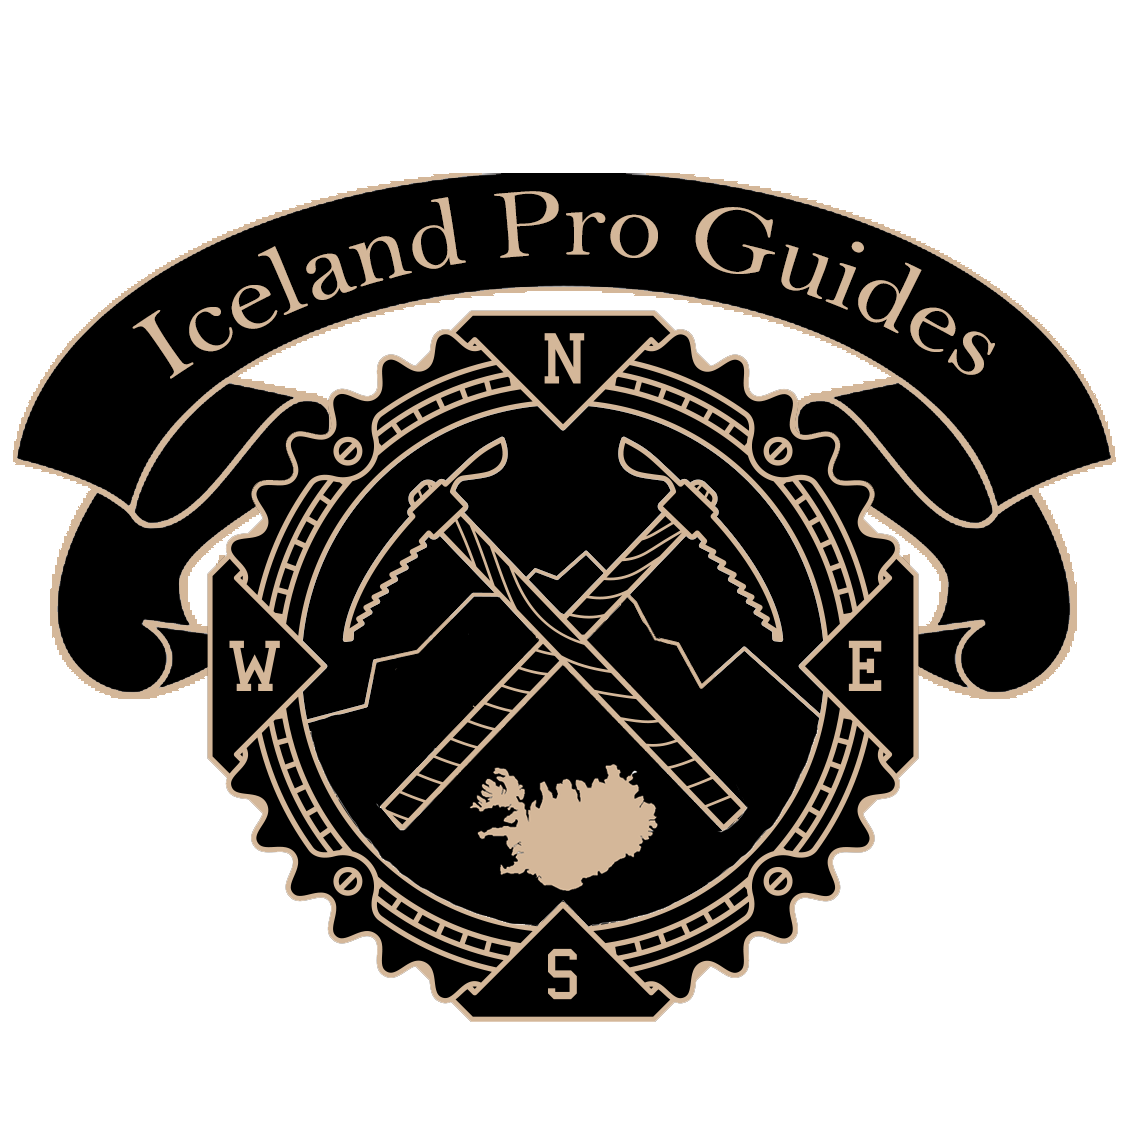 Iceland Pro Guides